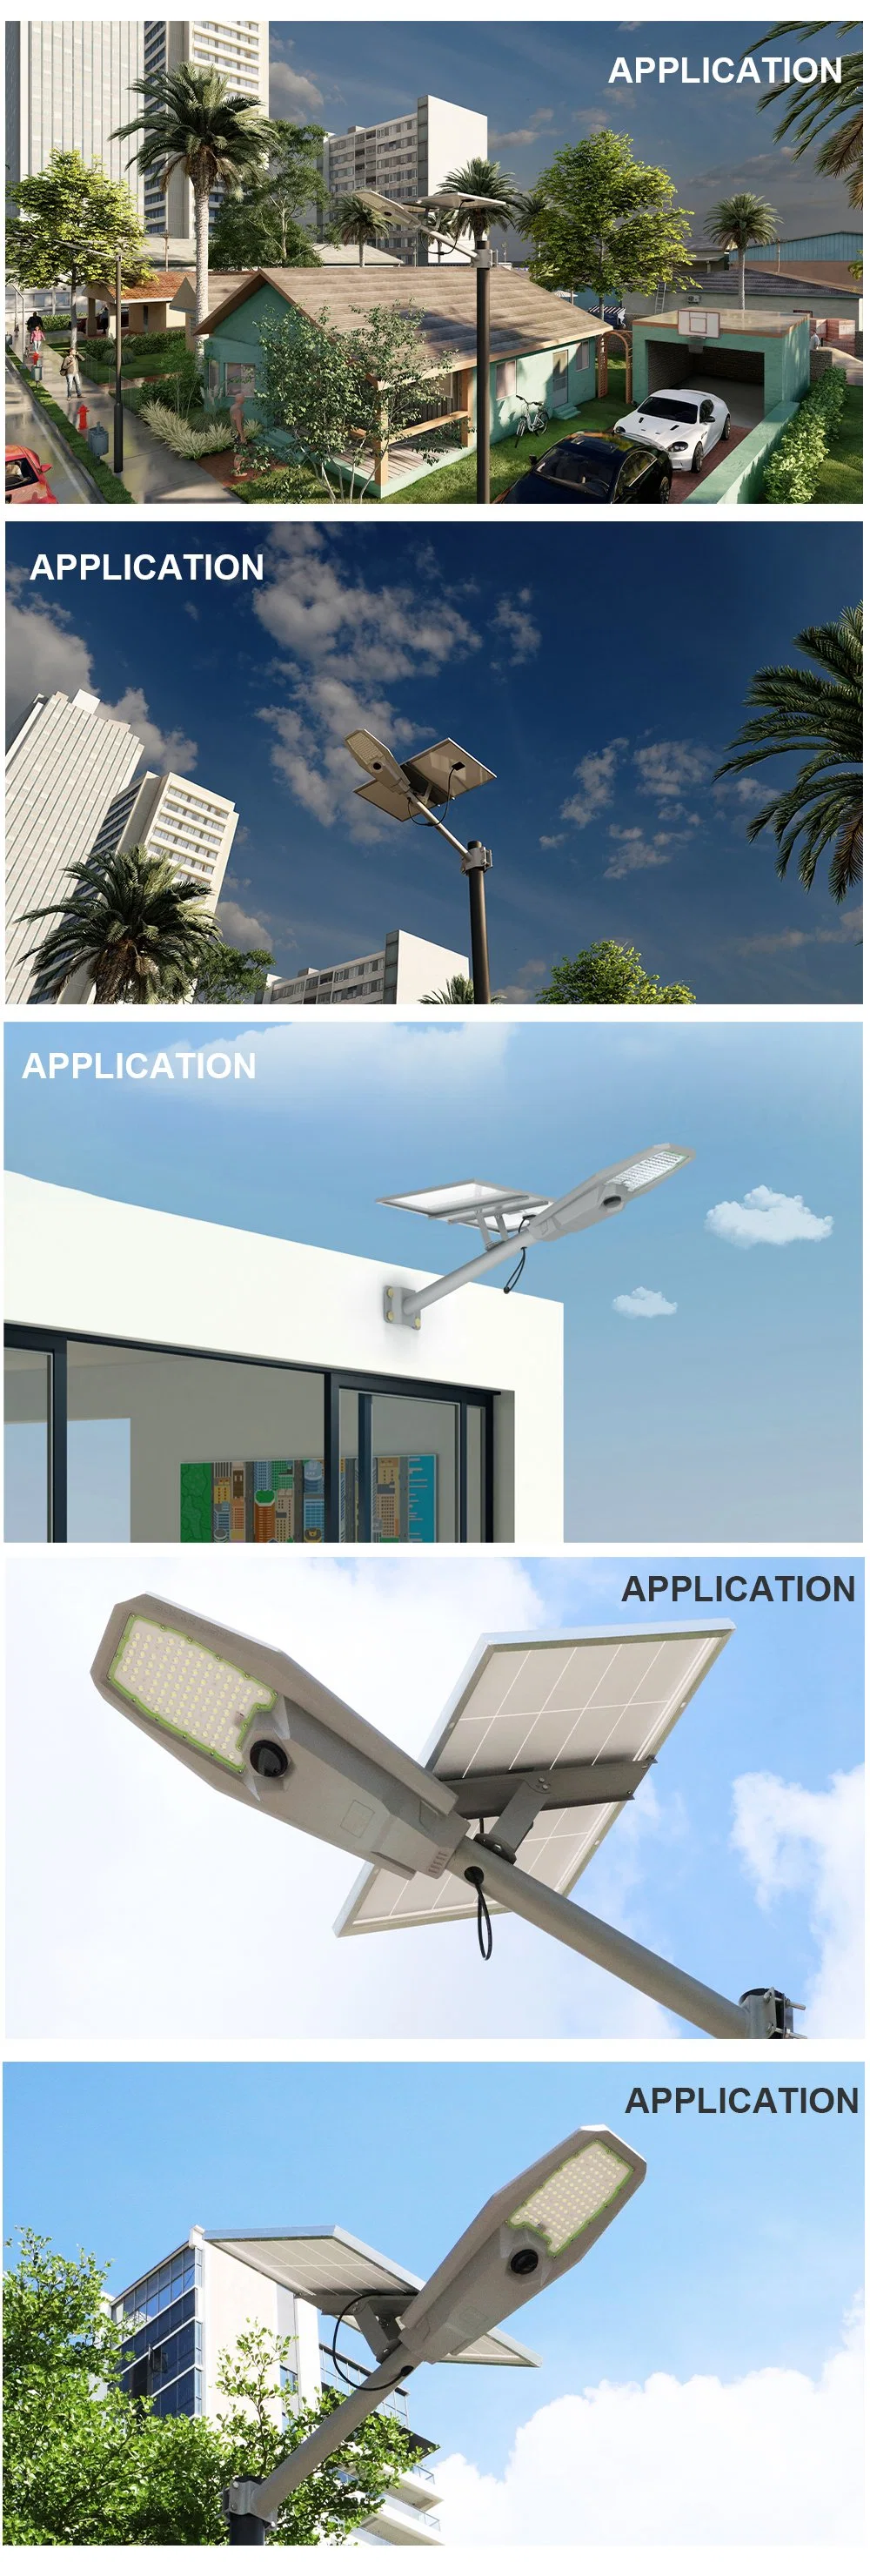 Sunc LED 200W 300W 400W 600W Private Mould Aluminium Factory Hot Sell IP65 Outdoor CE/FCC Energy Saving Factory Direct Solar Street Light with Motion Sensor